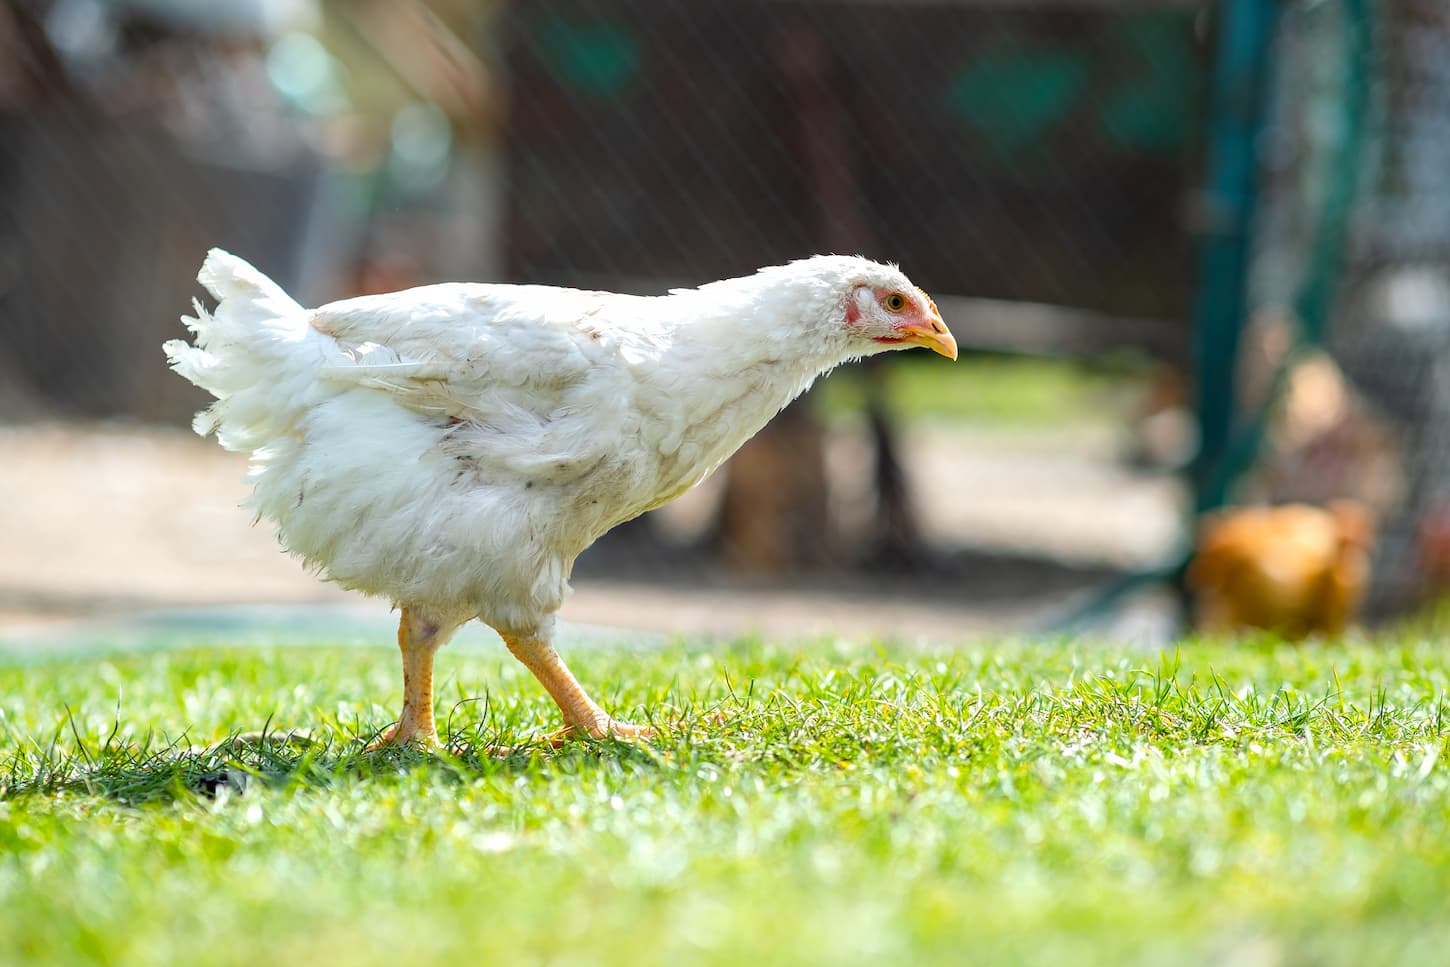 An image of a Hen feeding in a traditional rural barnyard. Close-up of chicken standing on barn yard with green grass.